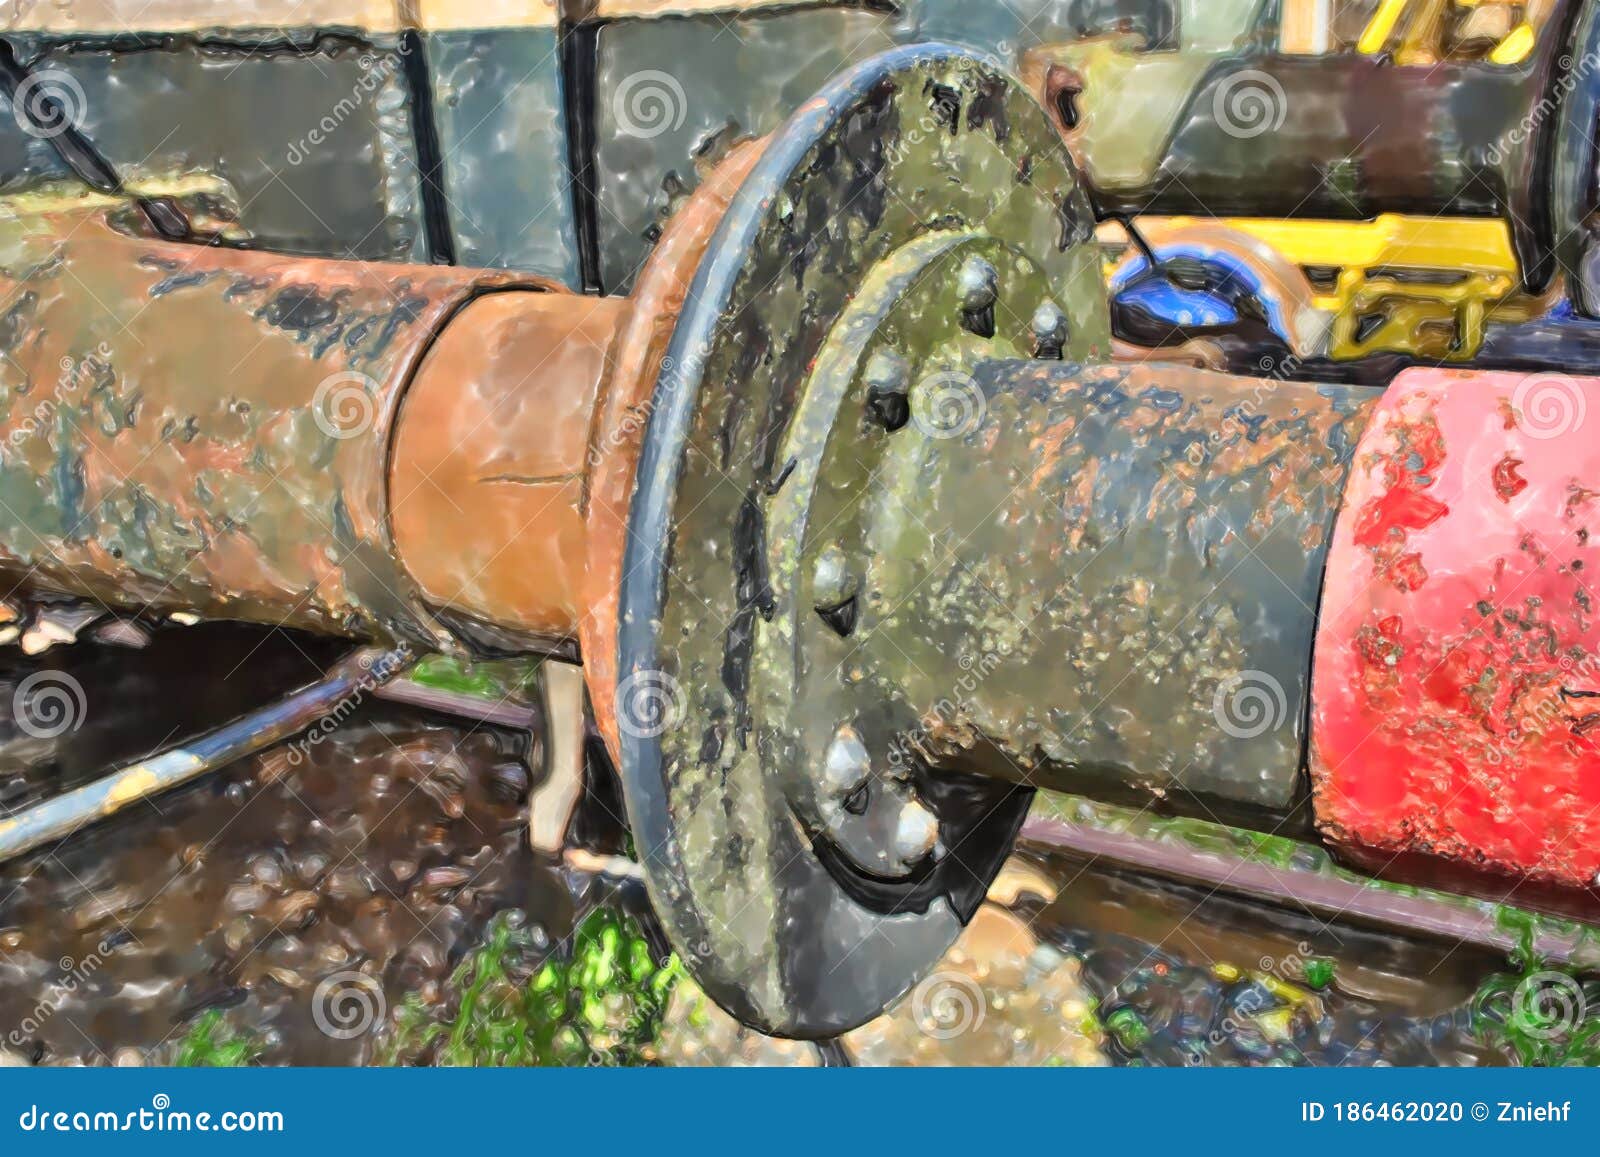 the rusty buffers of two old railway cars collide, transport